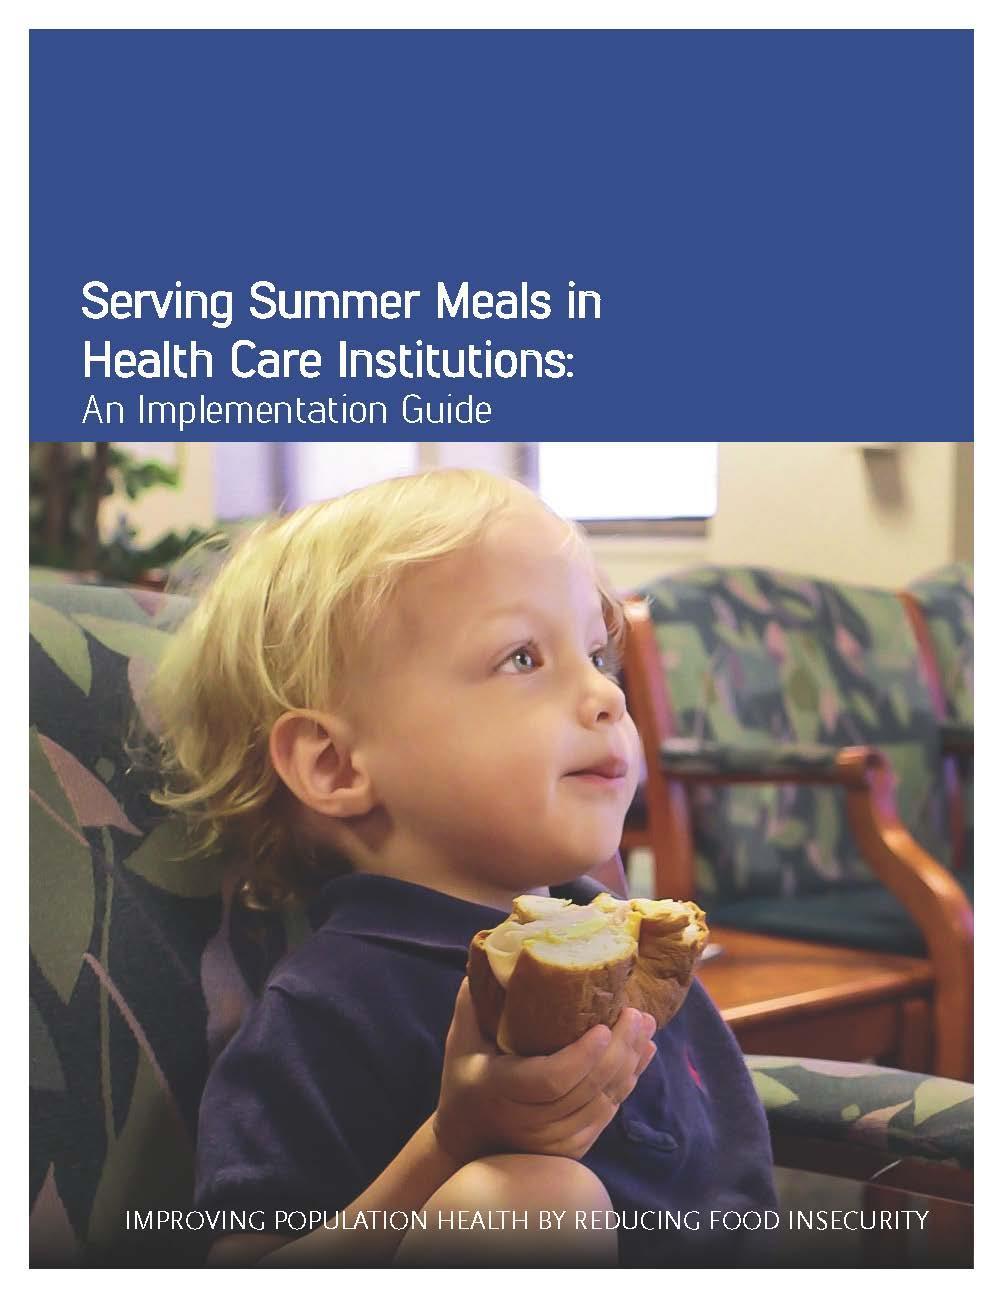 BECAUSE HUNGER DOESN T TAKE A SUMMER VACATION Serving Summer Meals in Health Care Institutions: An Implementation Guide And other resources at www.musc.